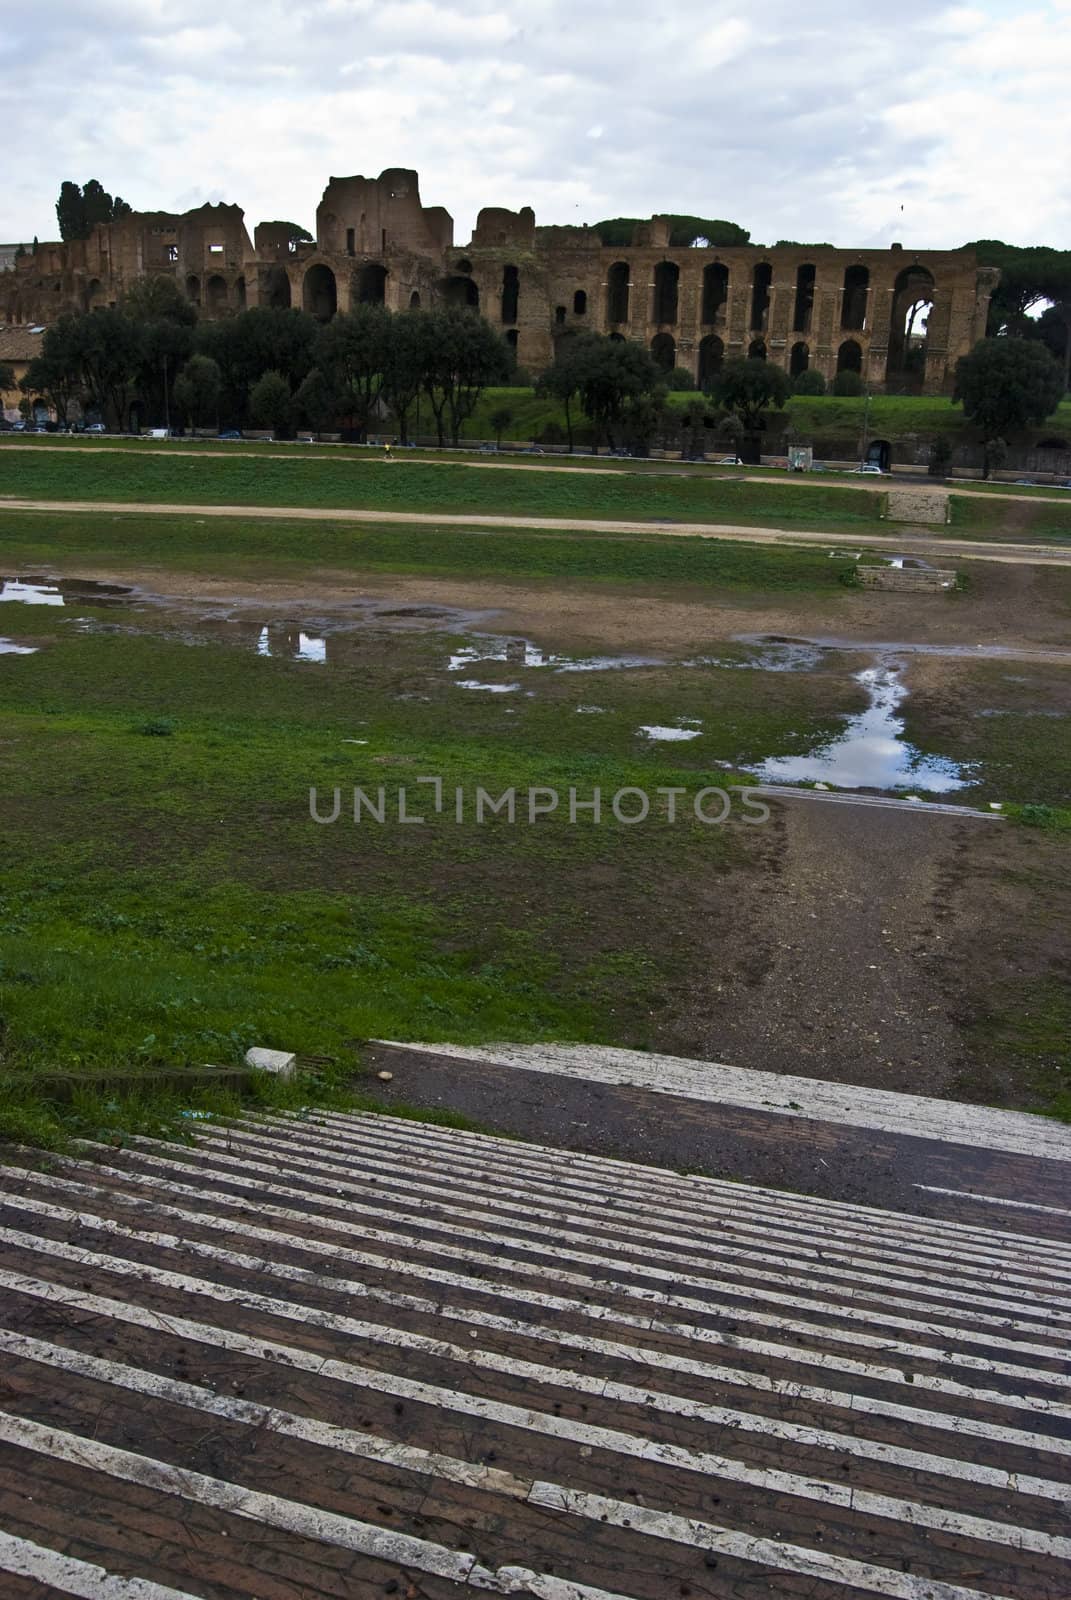 Circo Massimo in Rome and the palace of Augustus in the background